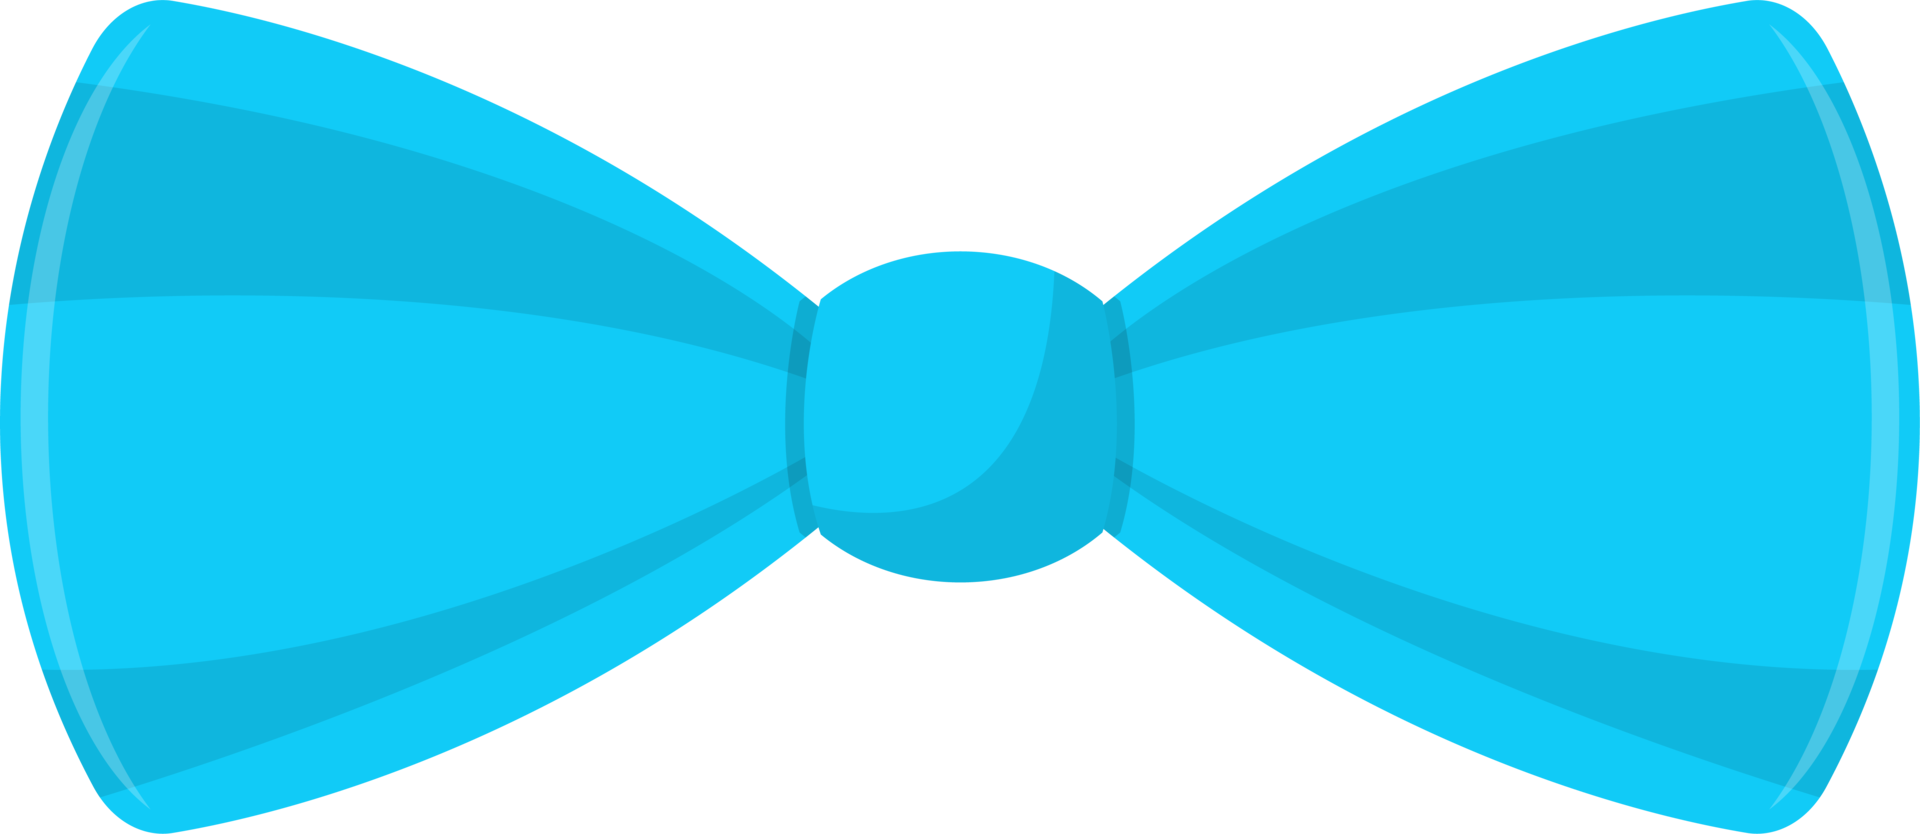 Free Bow tie clipart design illustration 9383724 PNG with Transparent  Background